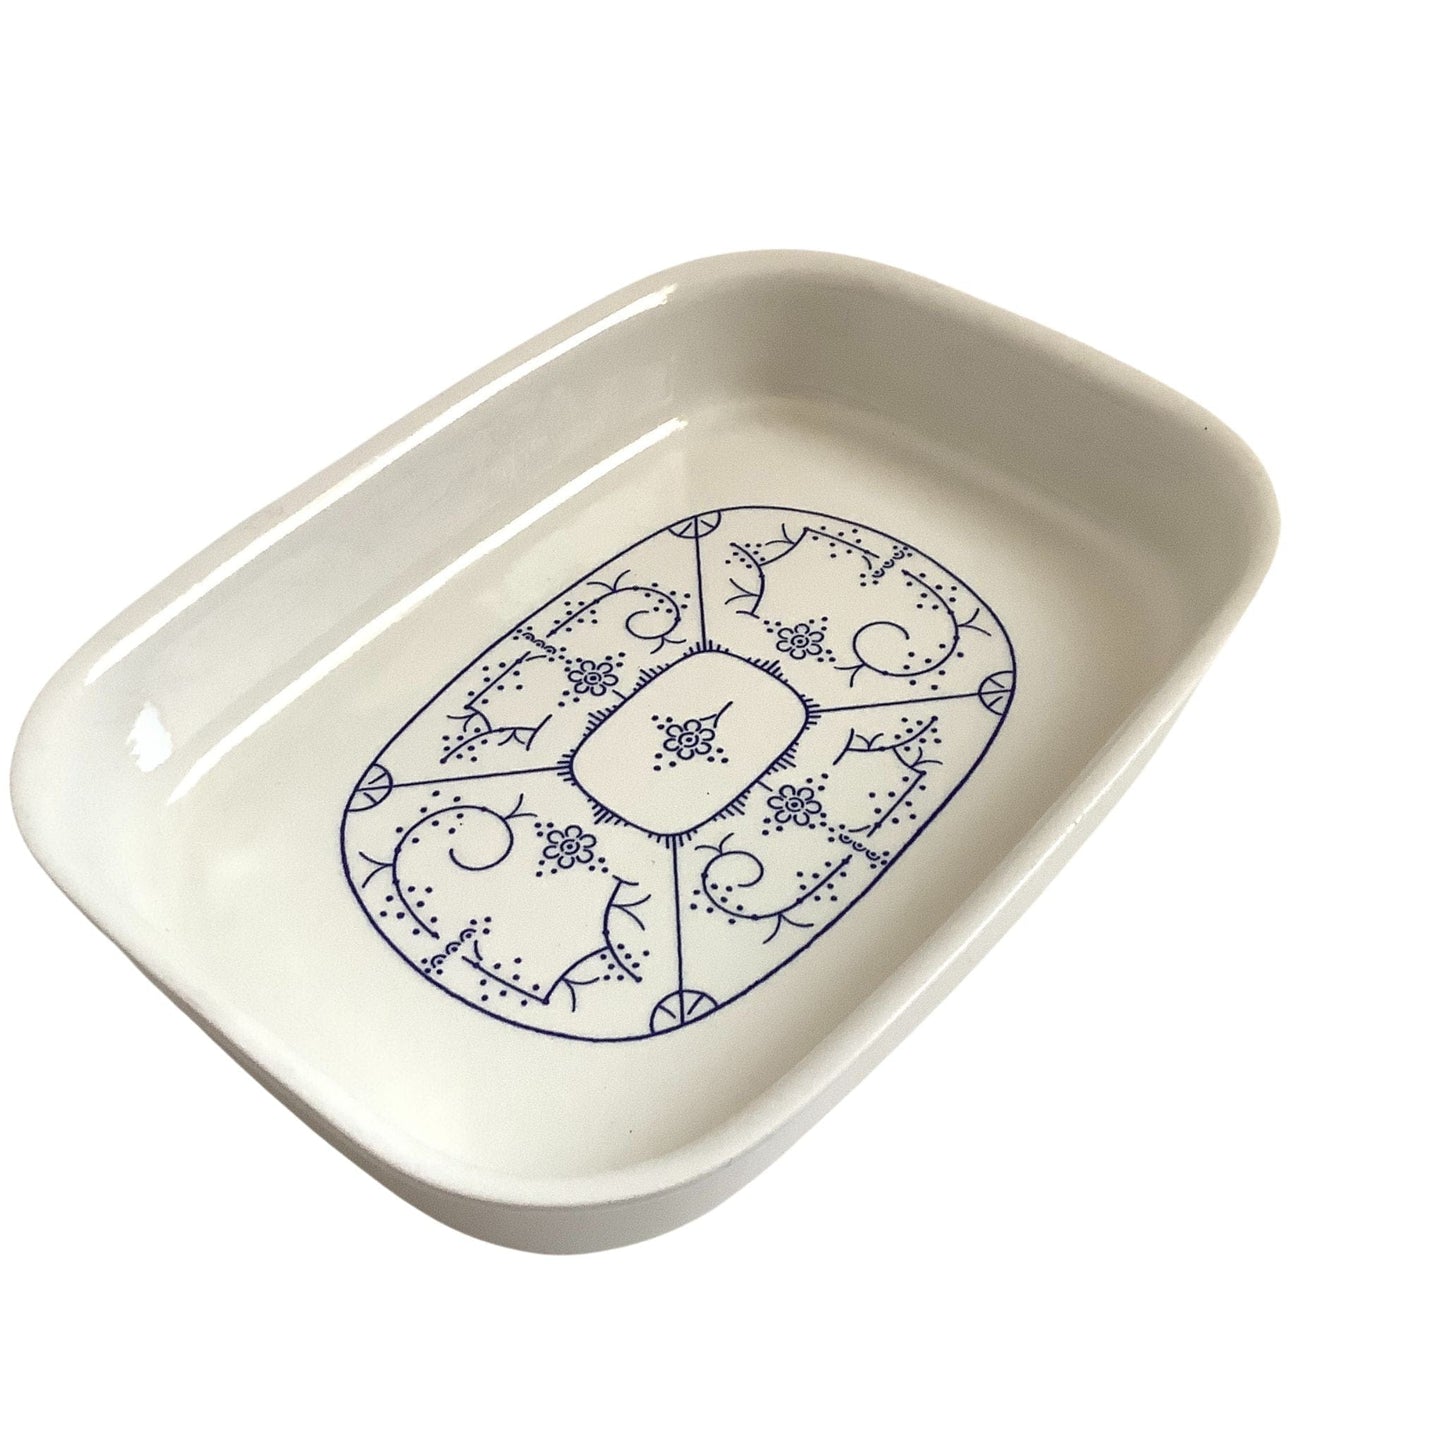 Boch Parafour Baking Dishes Multi / Ceramic / Y2K - Now